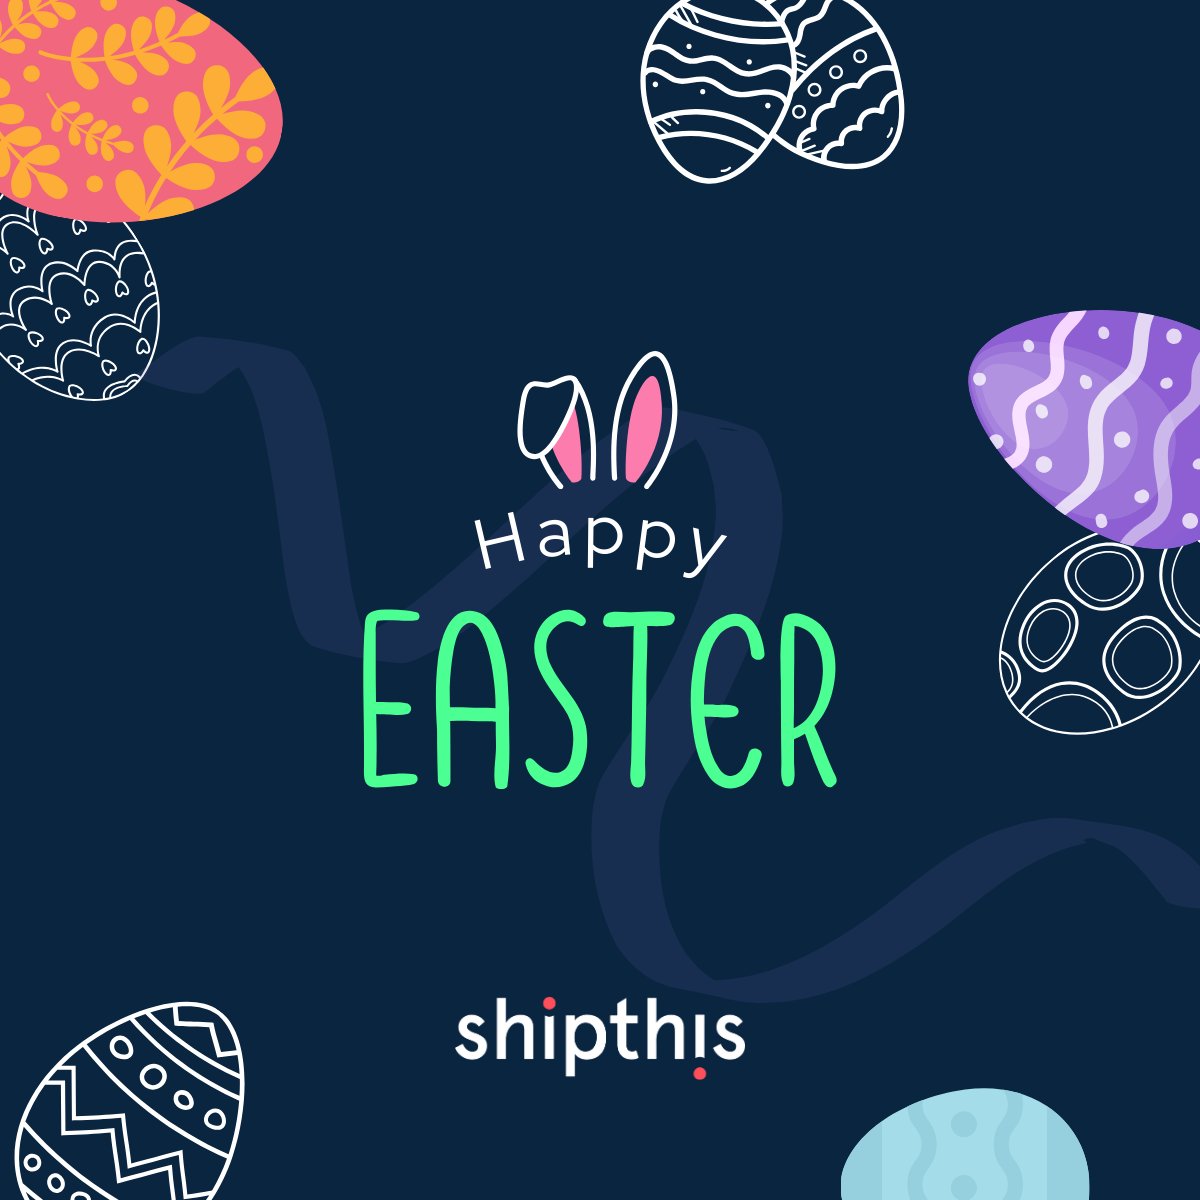 Wishing you an Easter filled with joy, peace, and the warmth of spring. May this day bring you renewed hope and happiness. Happy Easter! #easter2024 #eastereggs #shipthis